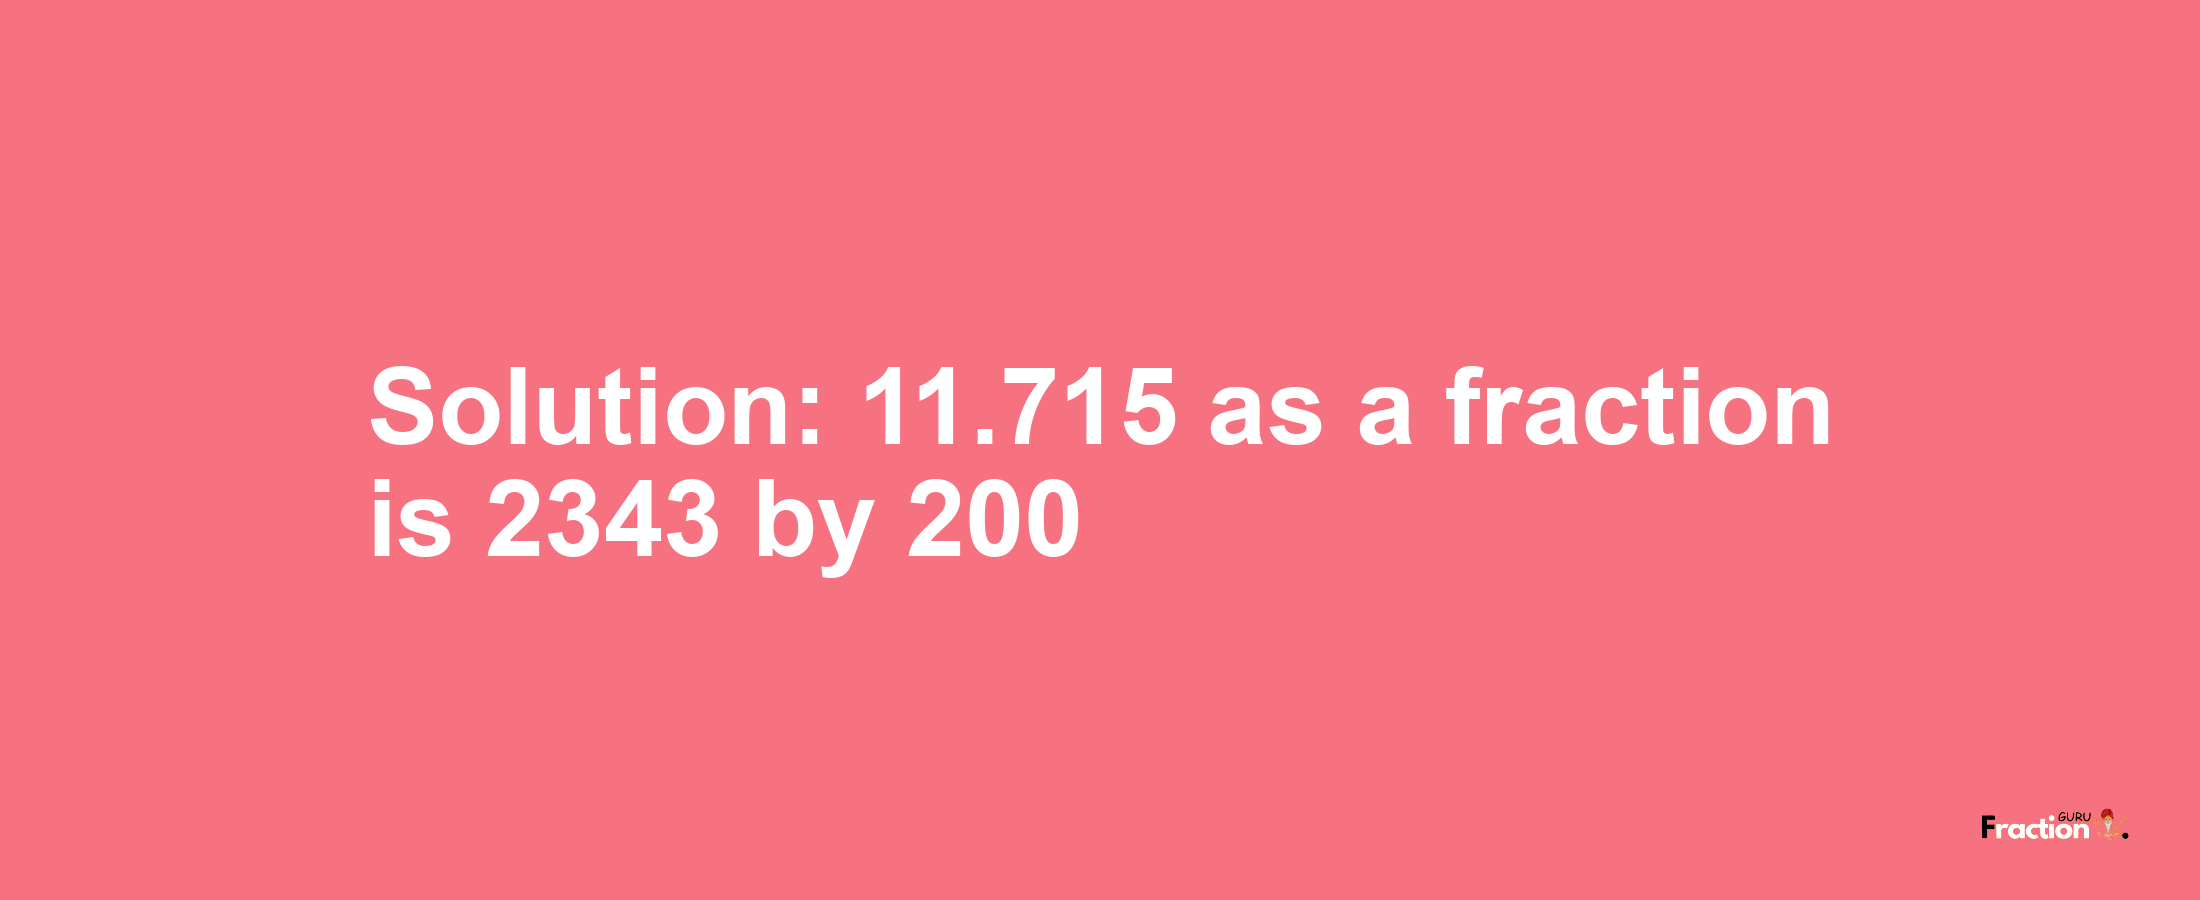 Solution:11.715 as a fraction is 2343/200